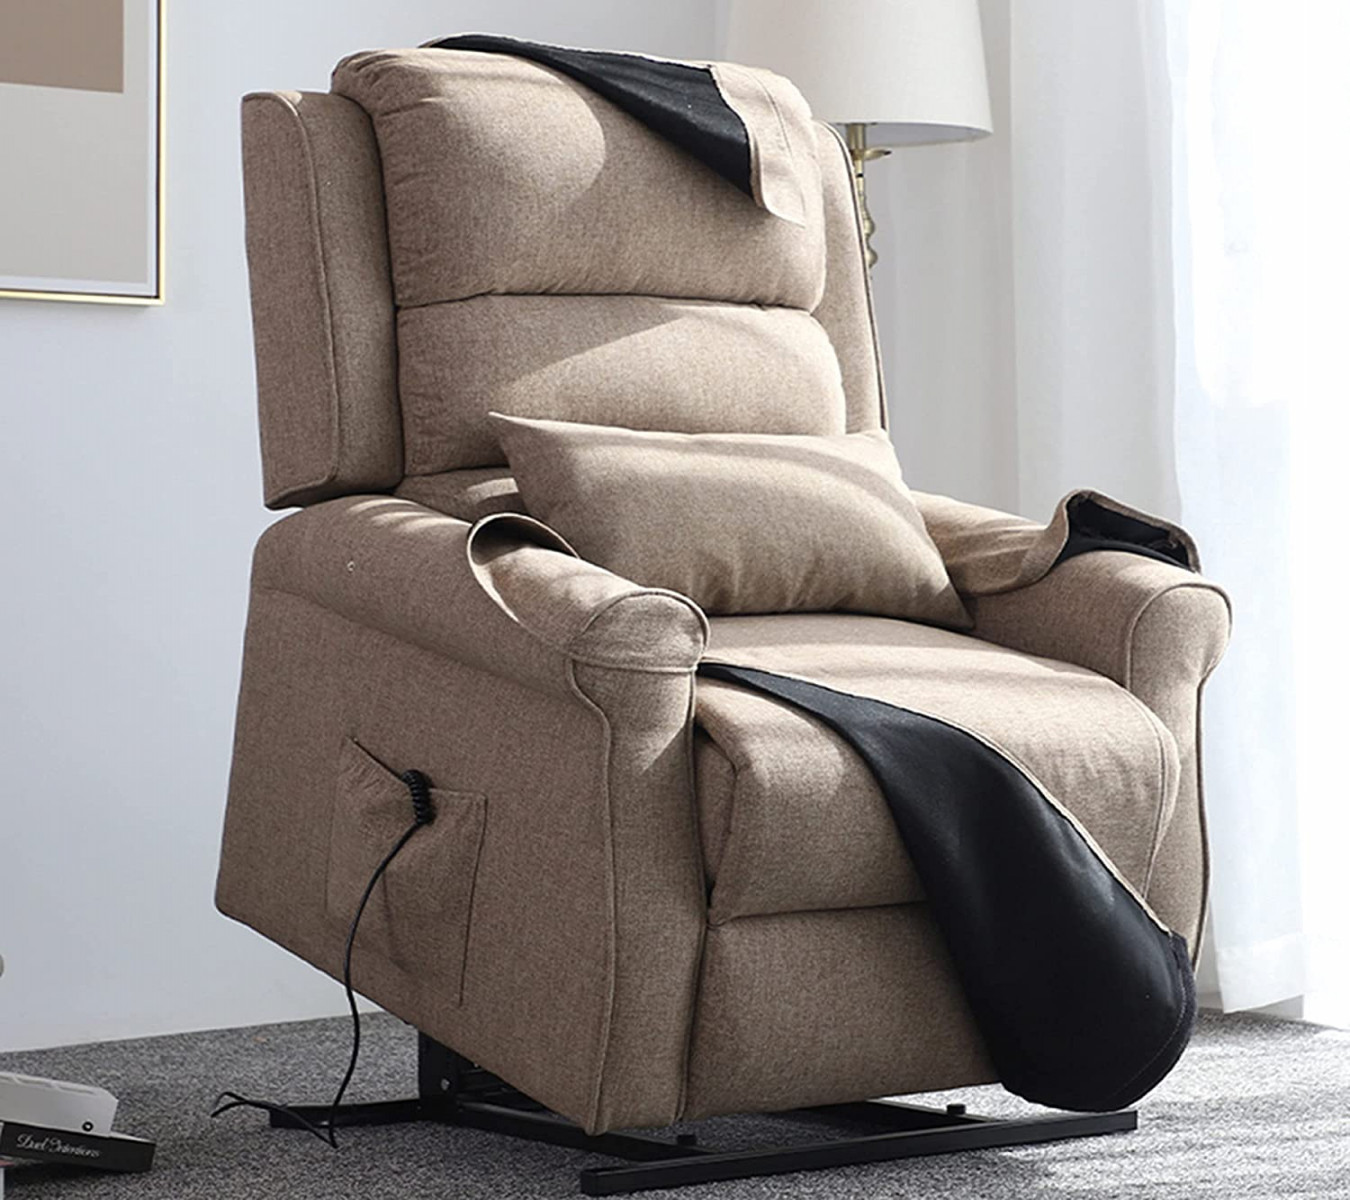 DJLOOKK Electric Power Lift Recliner Chair Sofa Lift Assist Chair for  Elderly People with Lumbar Support and Side Pockets Linen Tufted Fabric